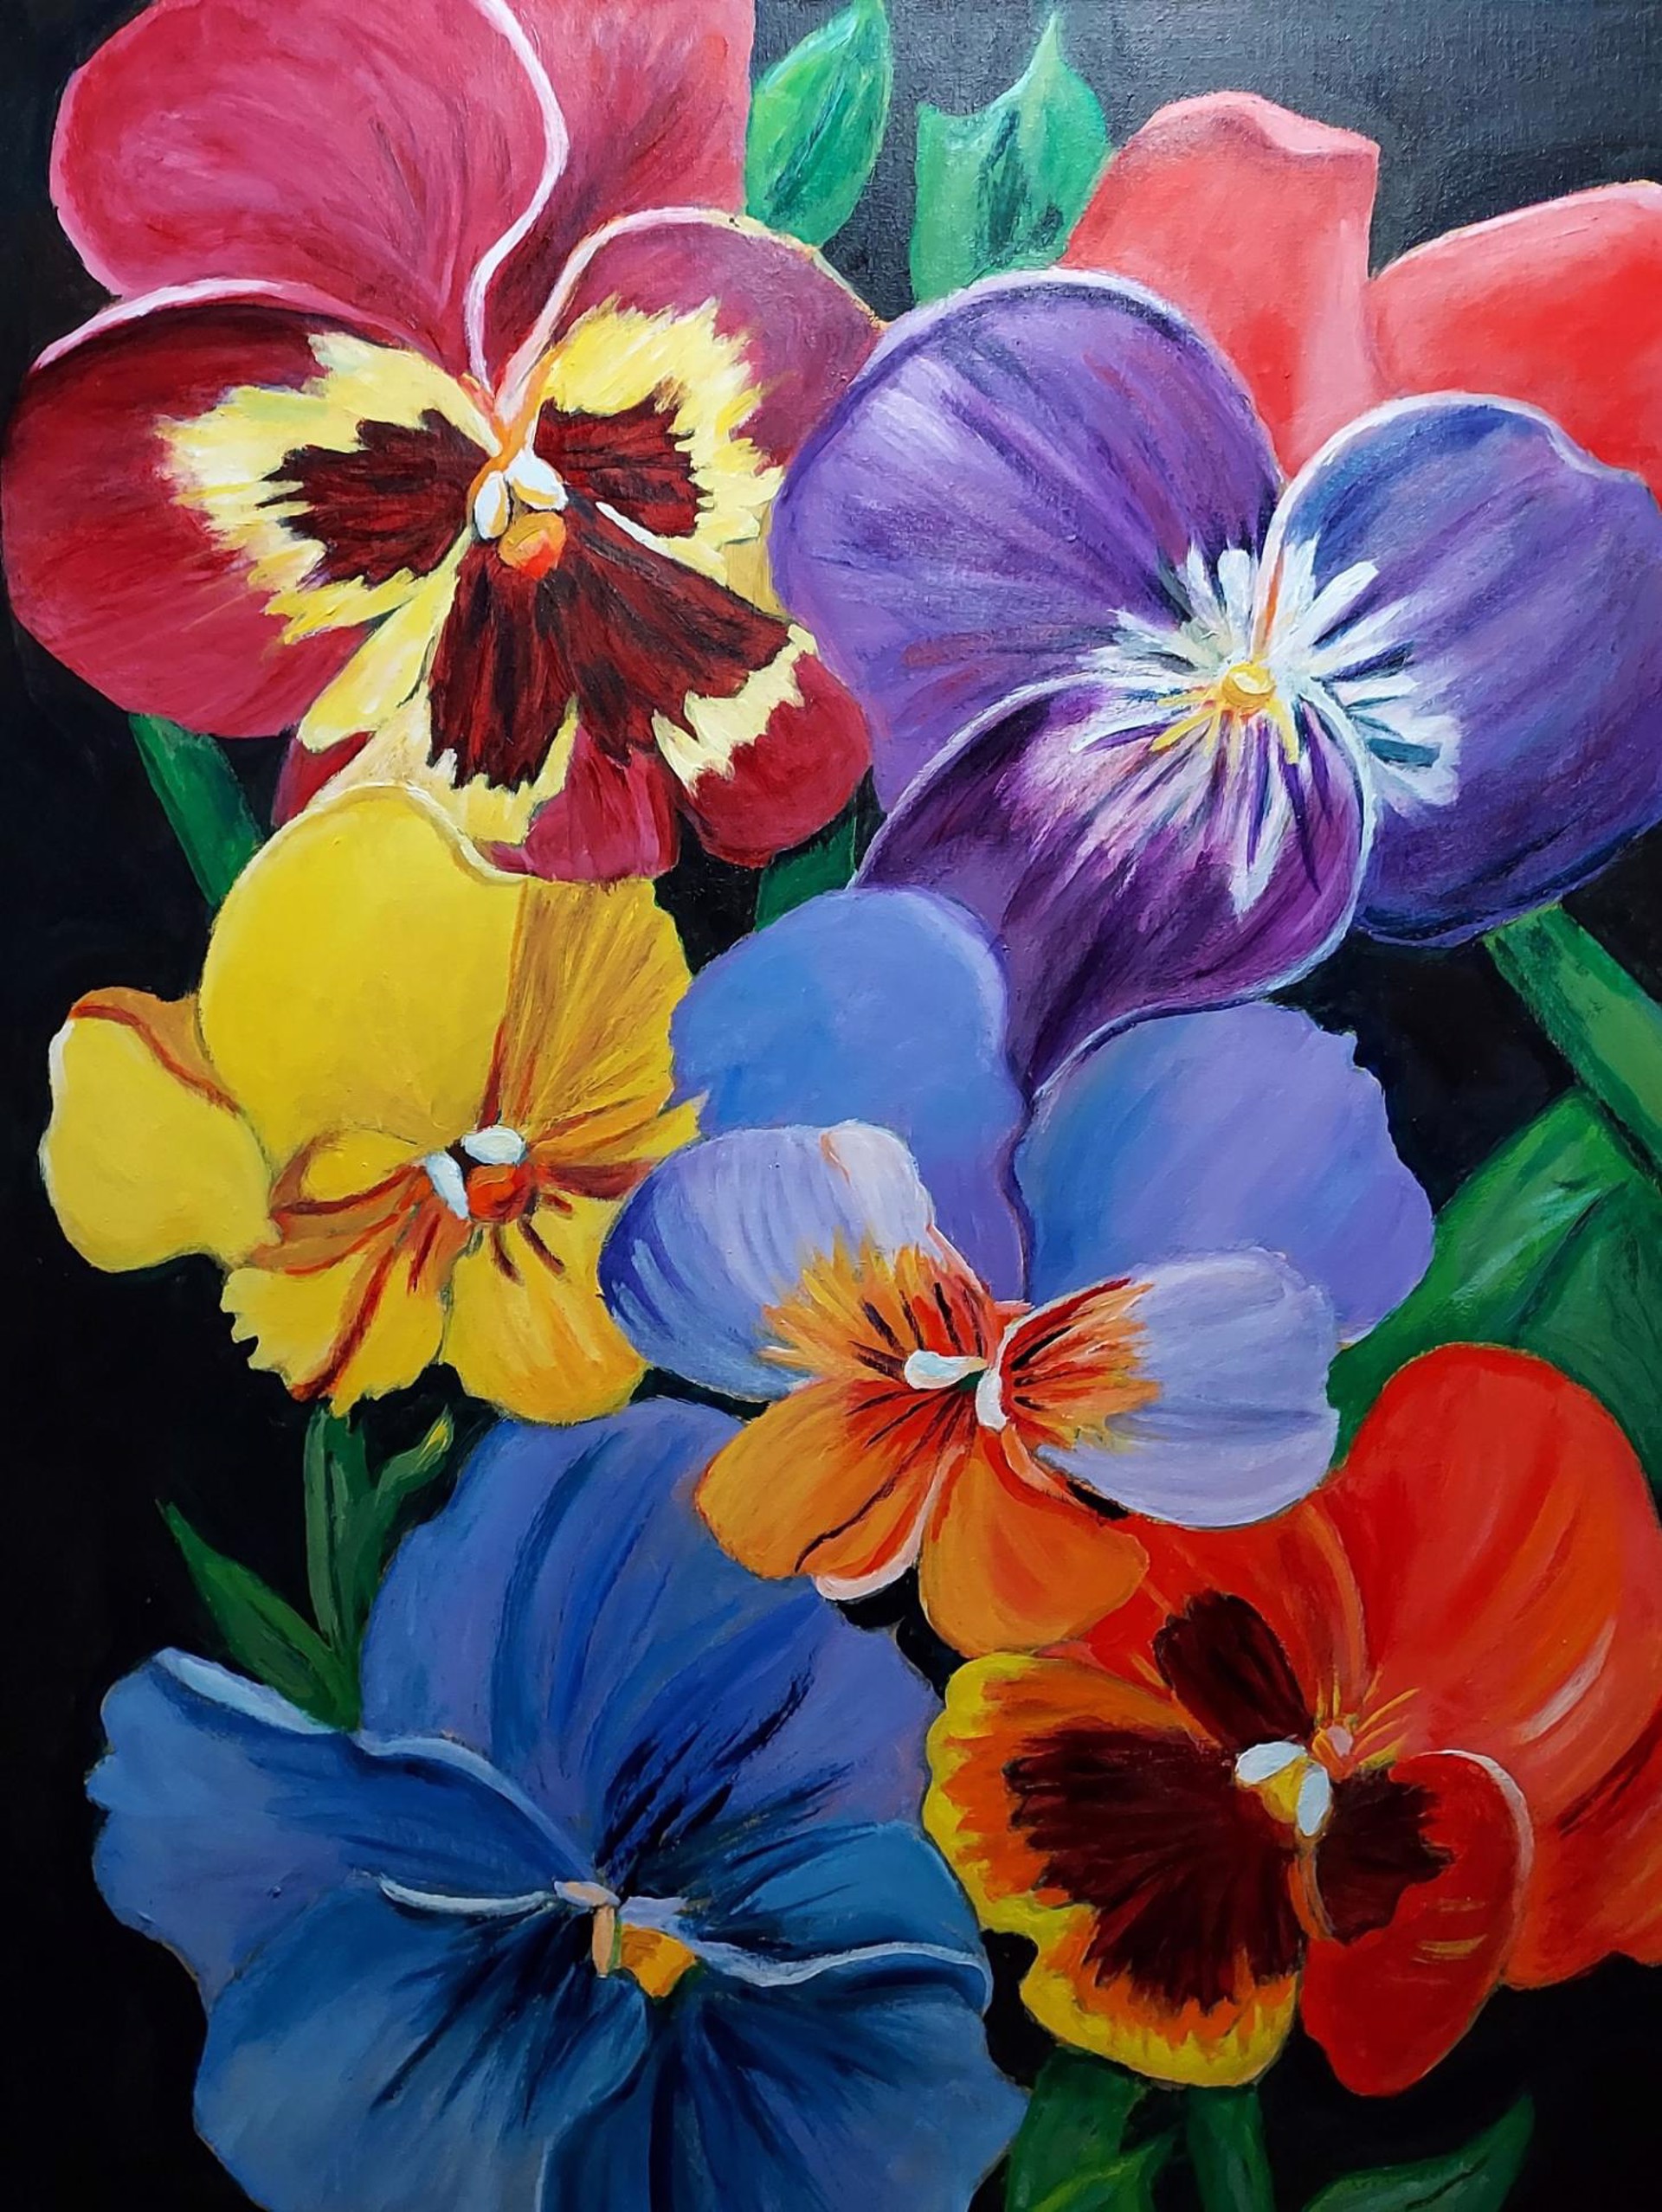 Playful Pansies by Andrea Folts